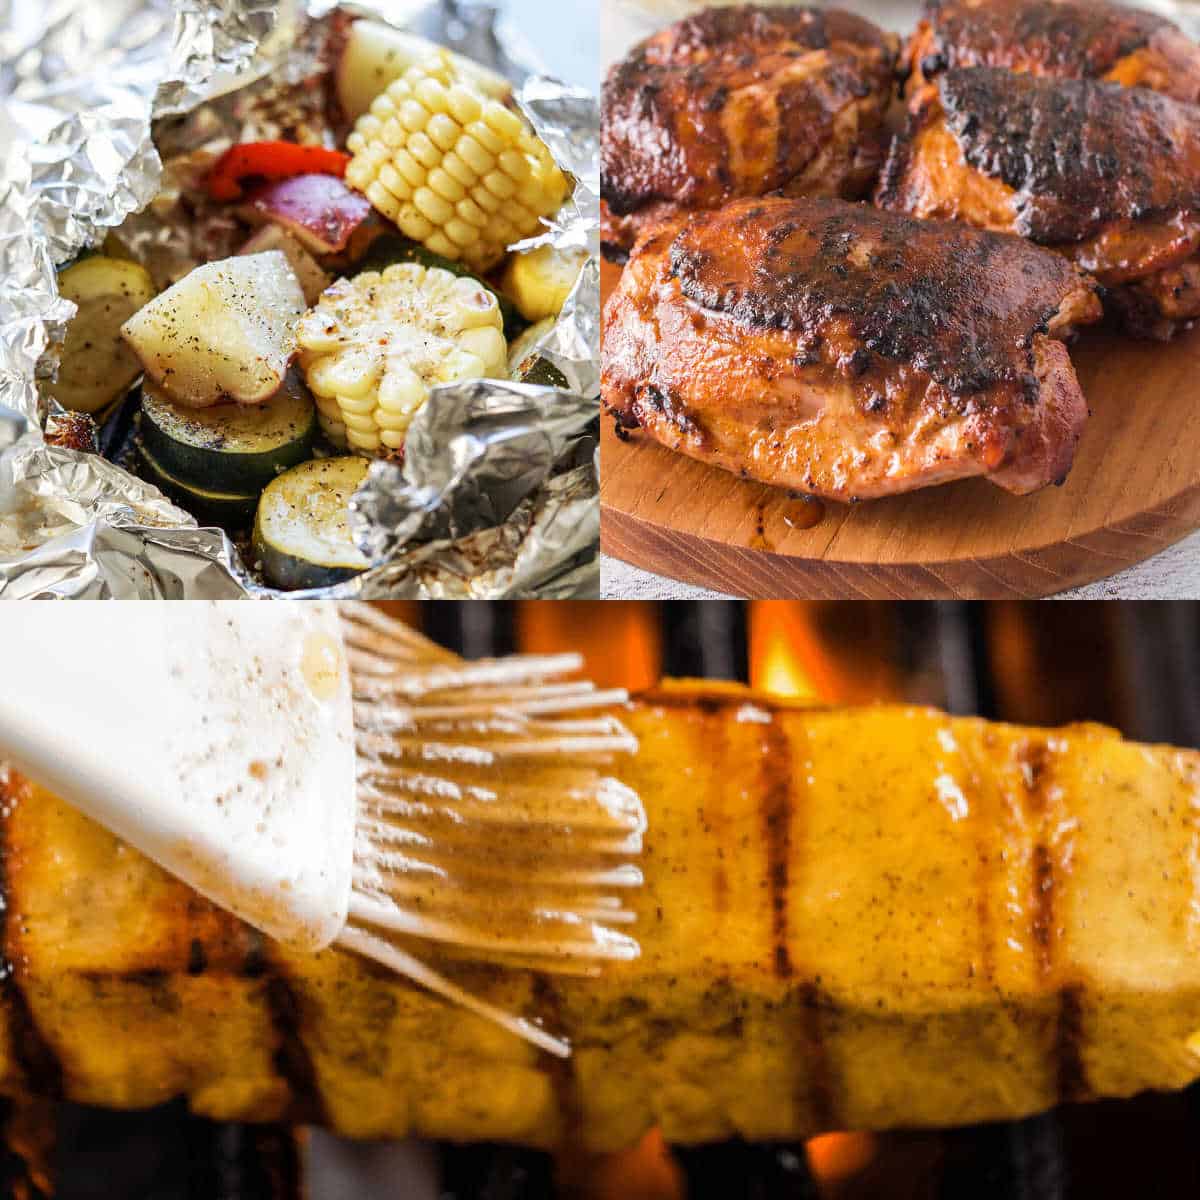 collage of 3 images showing southern grilled recipes - 1 image of grilled pineapple, another of grilled chicken and another of grilled vegetables.